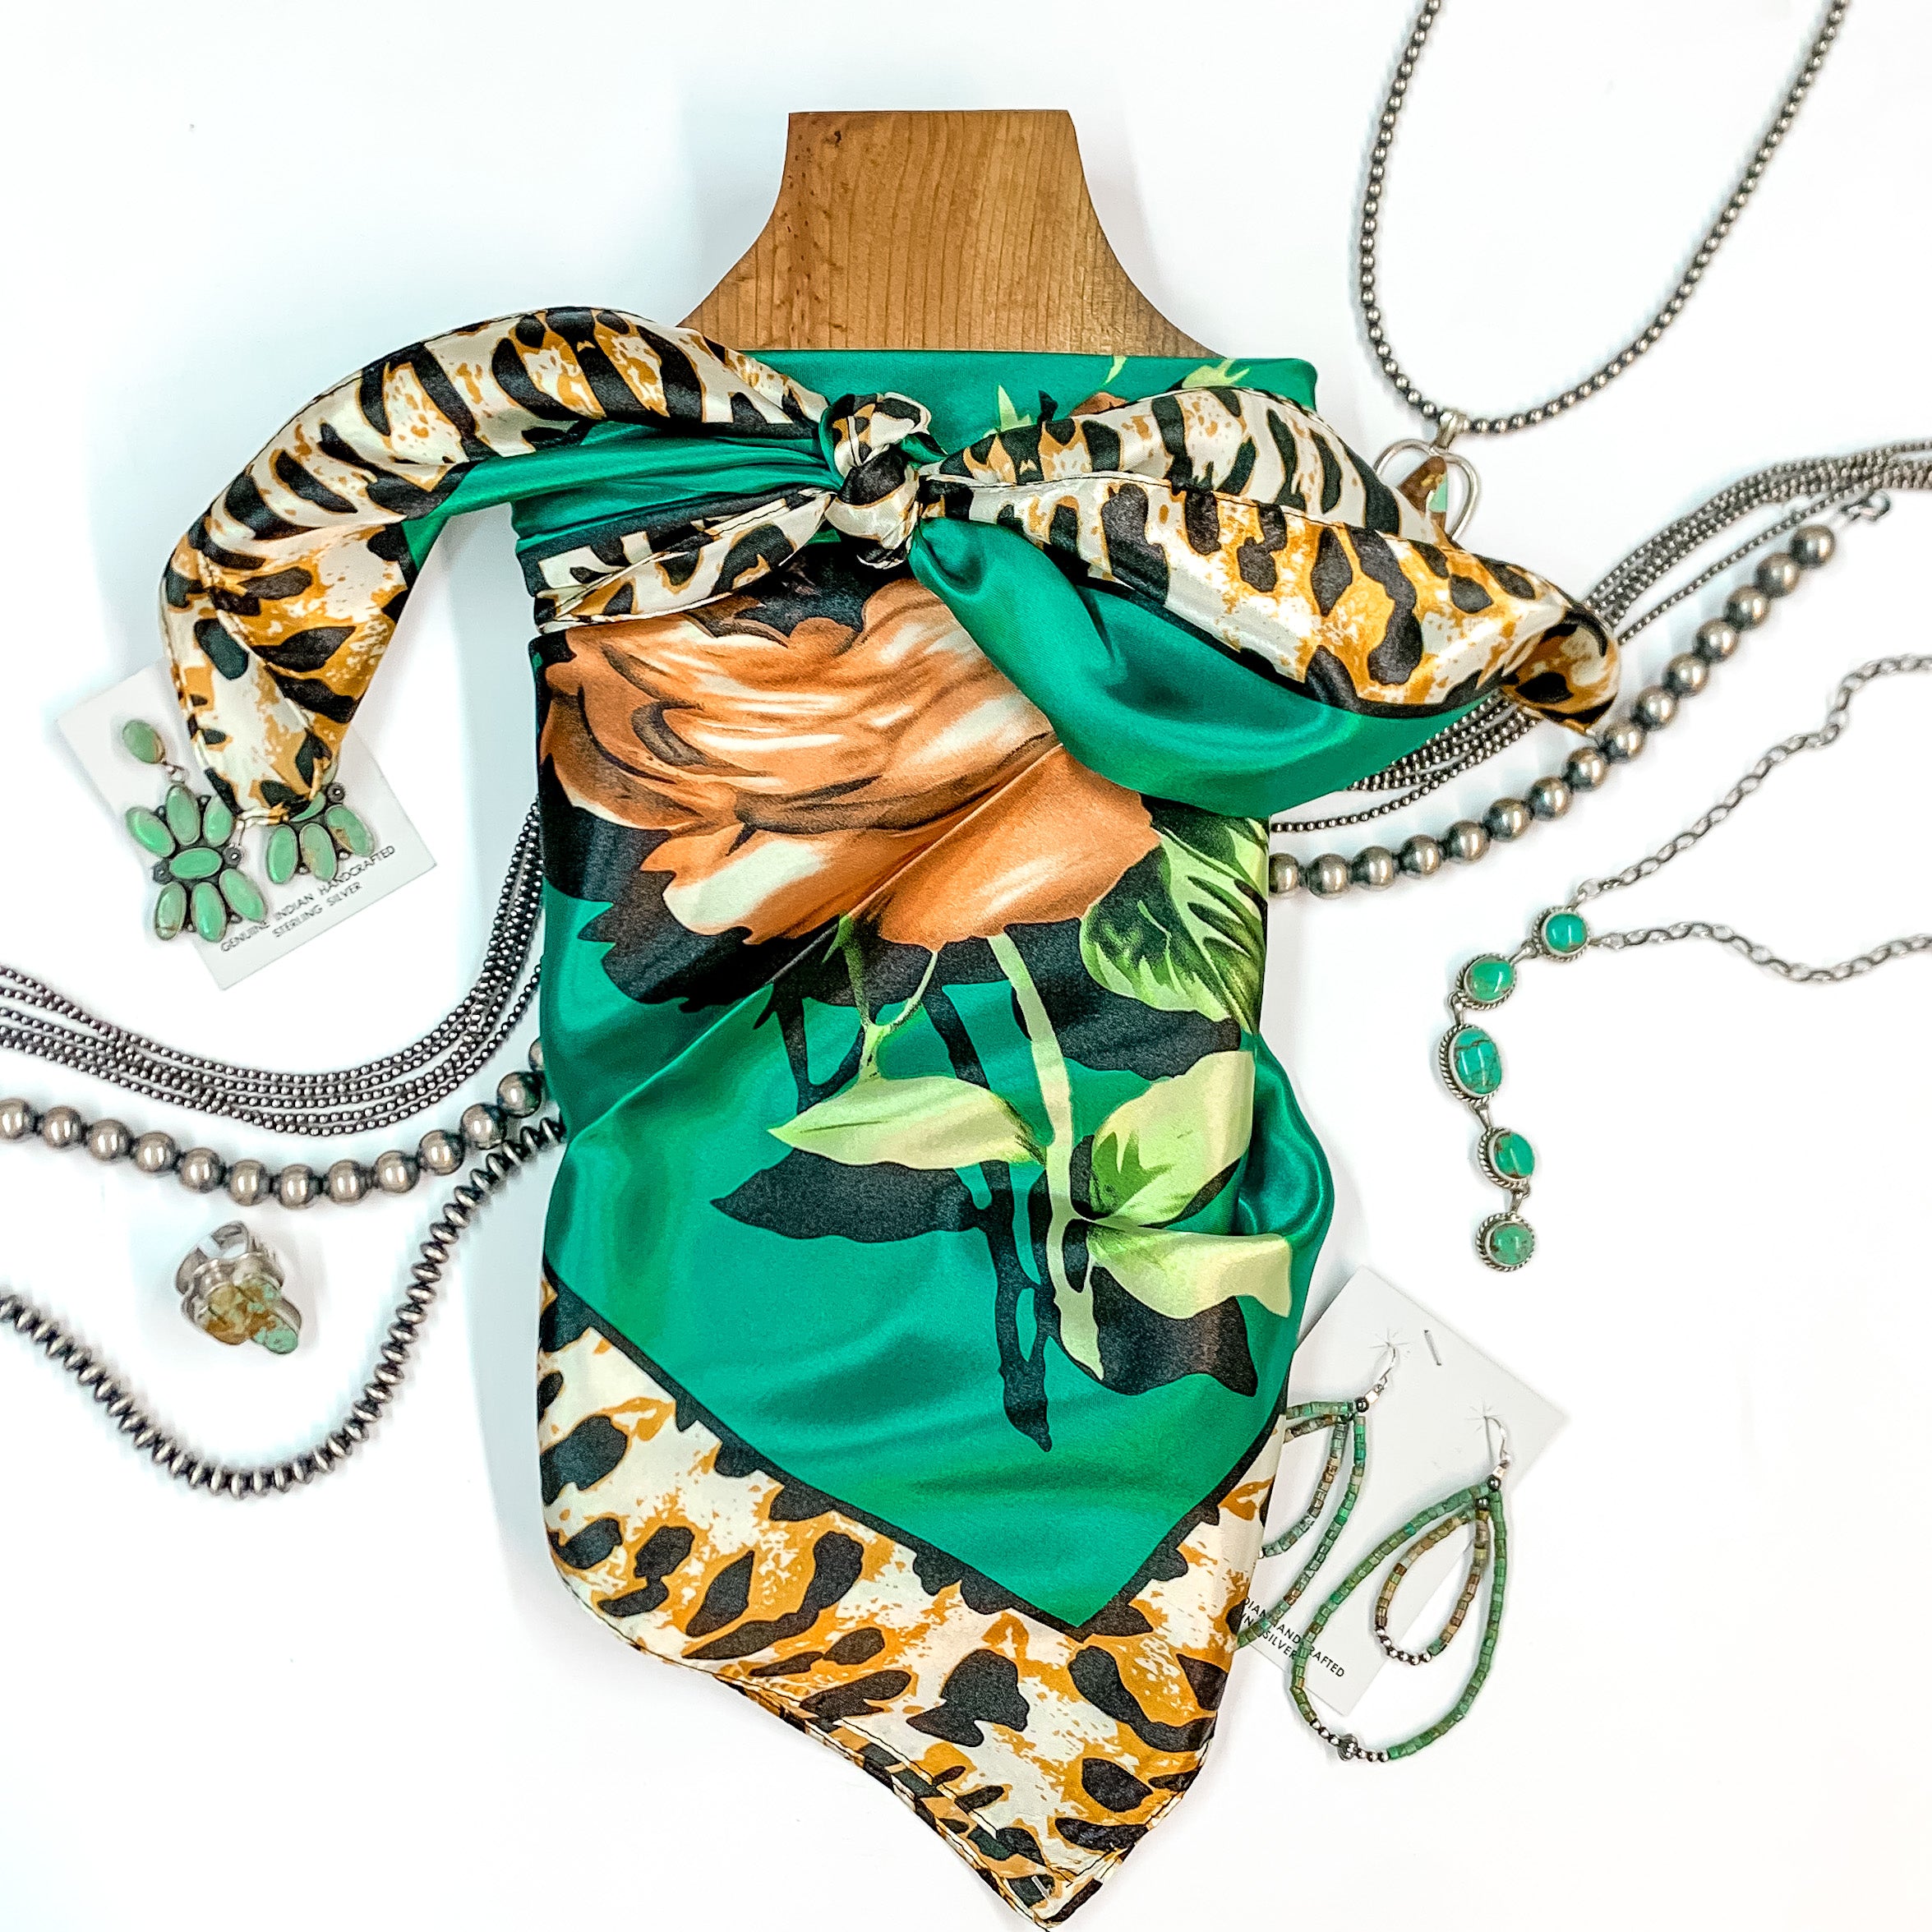 Patterned scarf in Fiesty Floral Emerald. Scarf is tied around a wooden piece. The scarf and piece of wood is pictured on a white background with Navajo jewelry spread out around it.